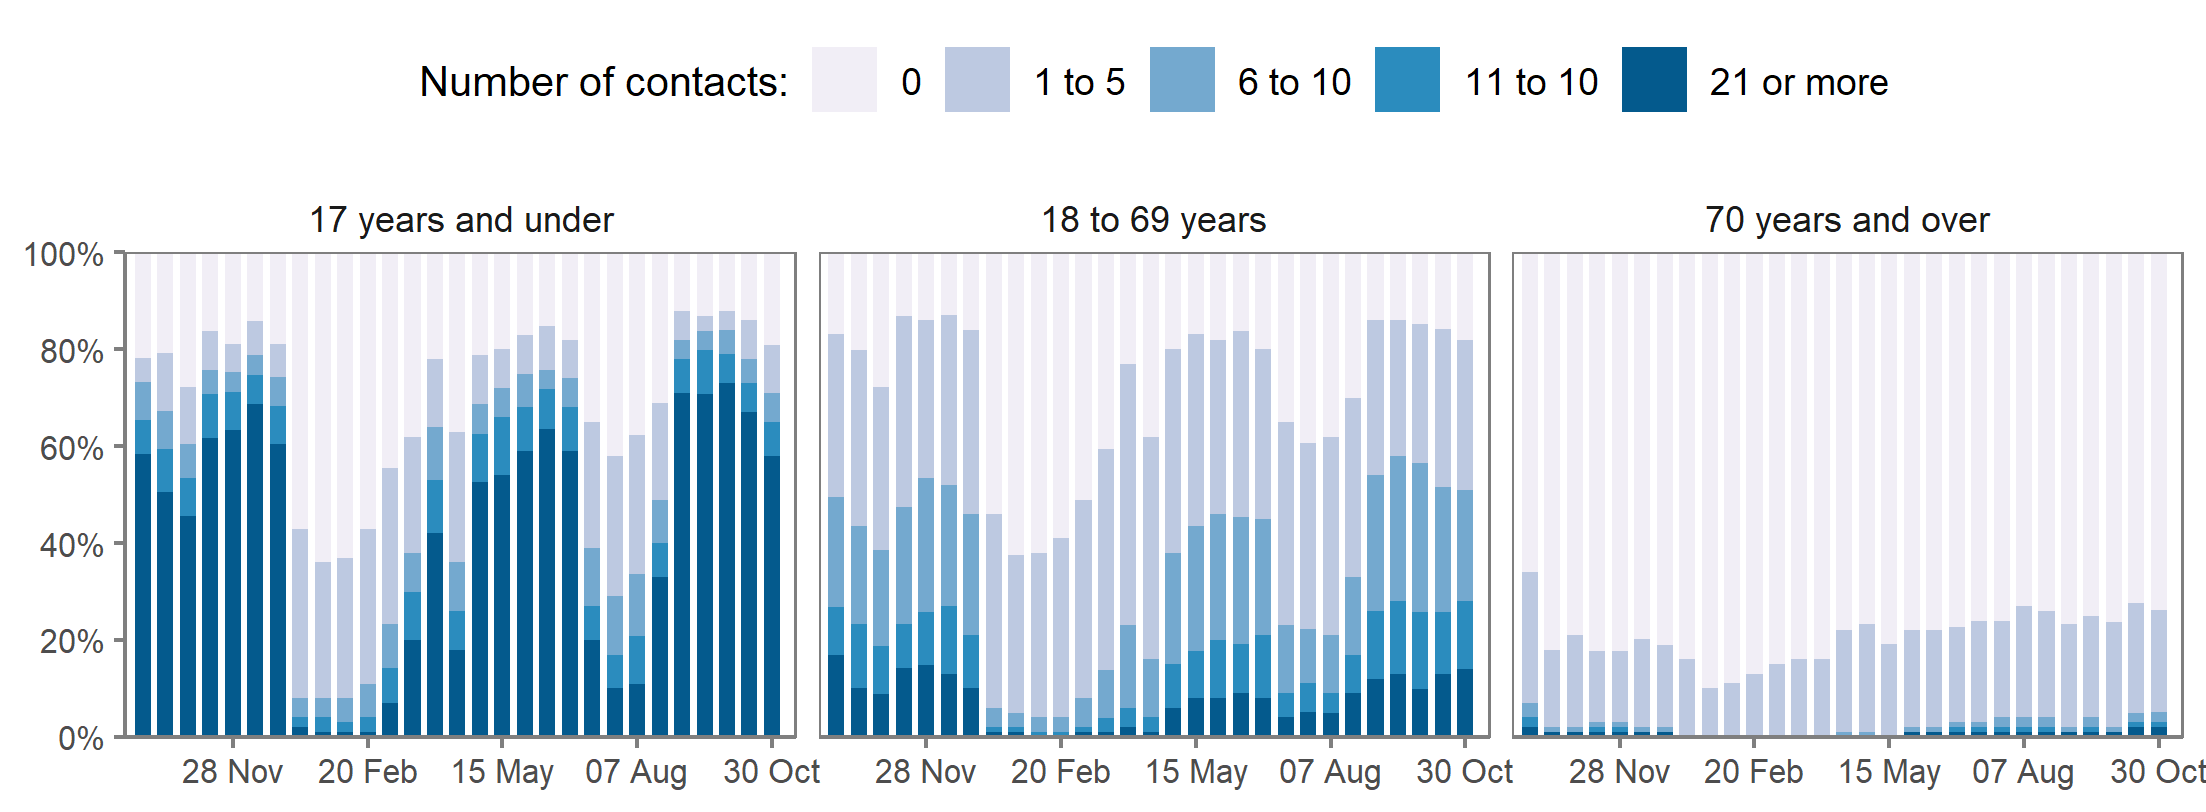 The proportions of school-age children reporting each category of number of socially distanced contacts (0, 1 to 5, 6 to 10, 11 to 20, and 21 or more contacts) is shown in Figure 2.  Children appear to have consistently had more socially distanced contacts with those under 18 than with those aged 18-69 or over 70s.  Each bar represents one two-week period, denoted by the end date of that period. For example, 30 October 2021 denotes the estimate relating to 17 October to 30 October 2021.